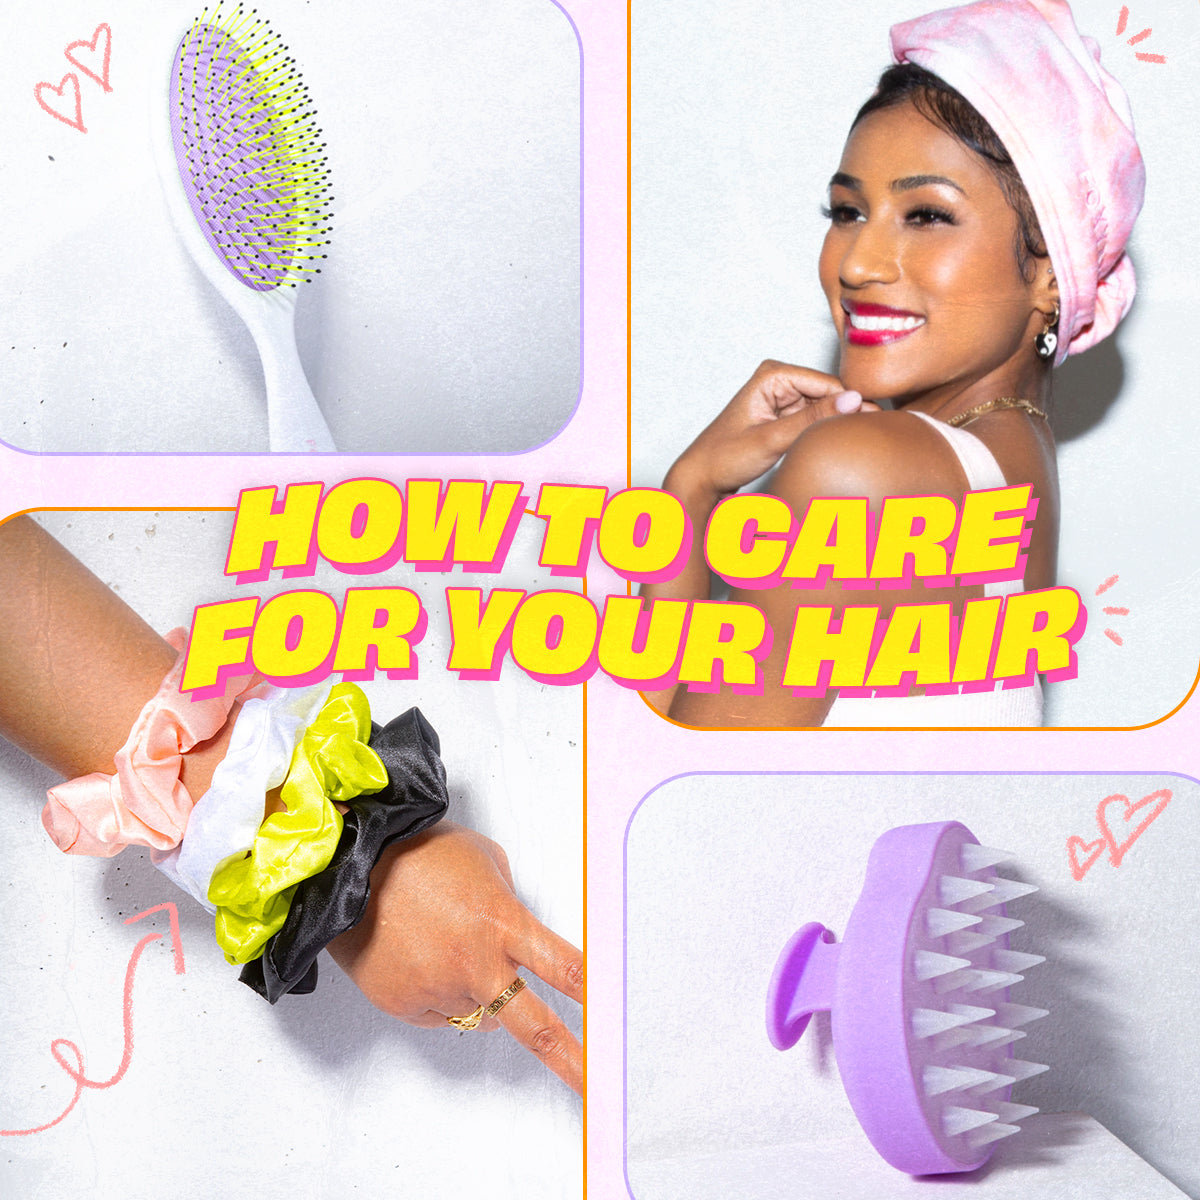 How to Care for Your Hair (From Properly Shampooing to Post-Wash Routines!) featured image